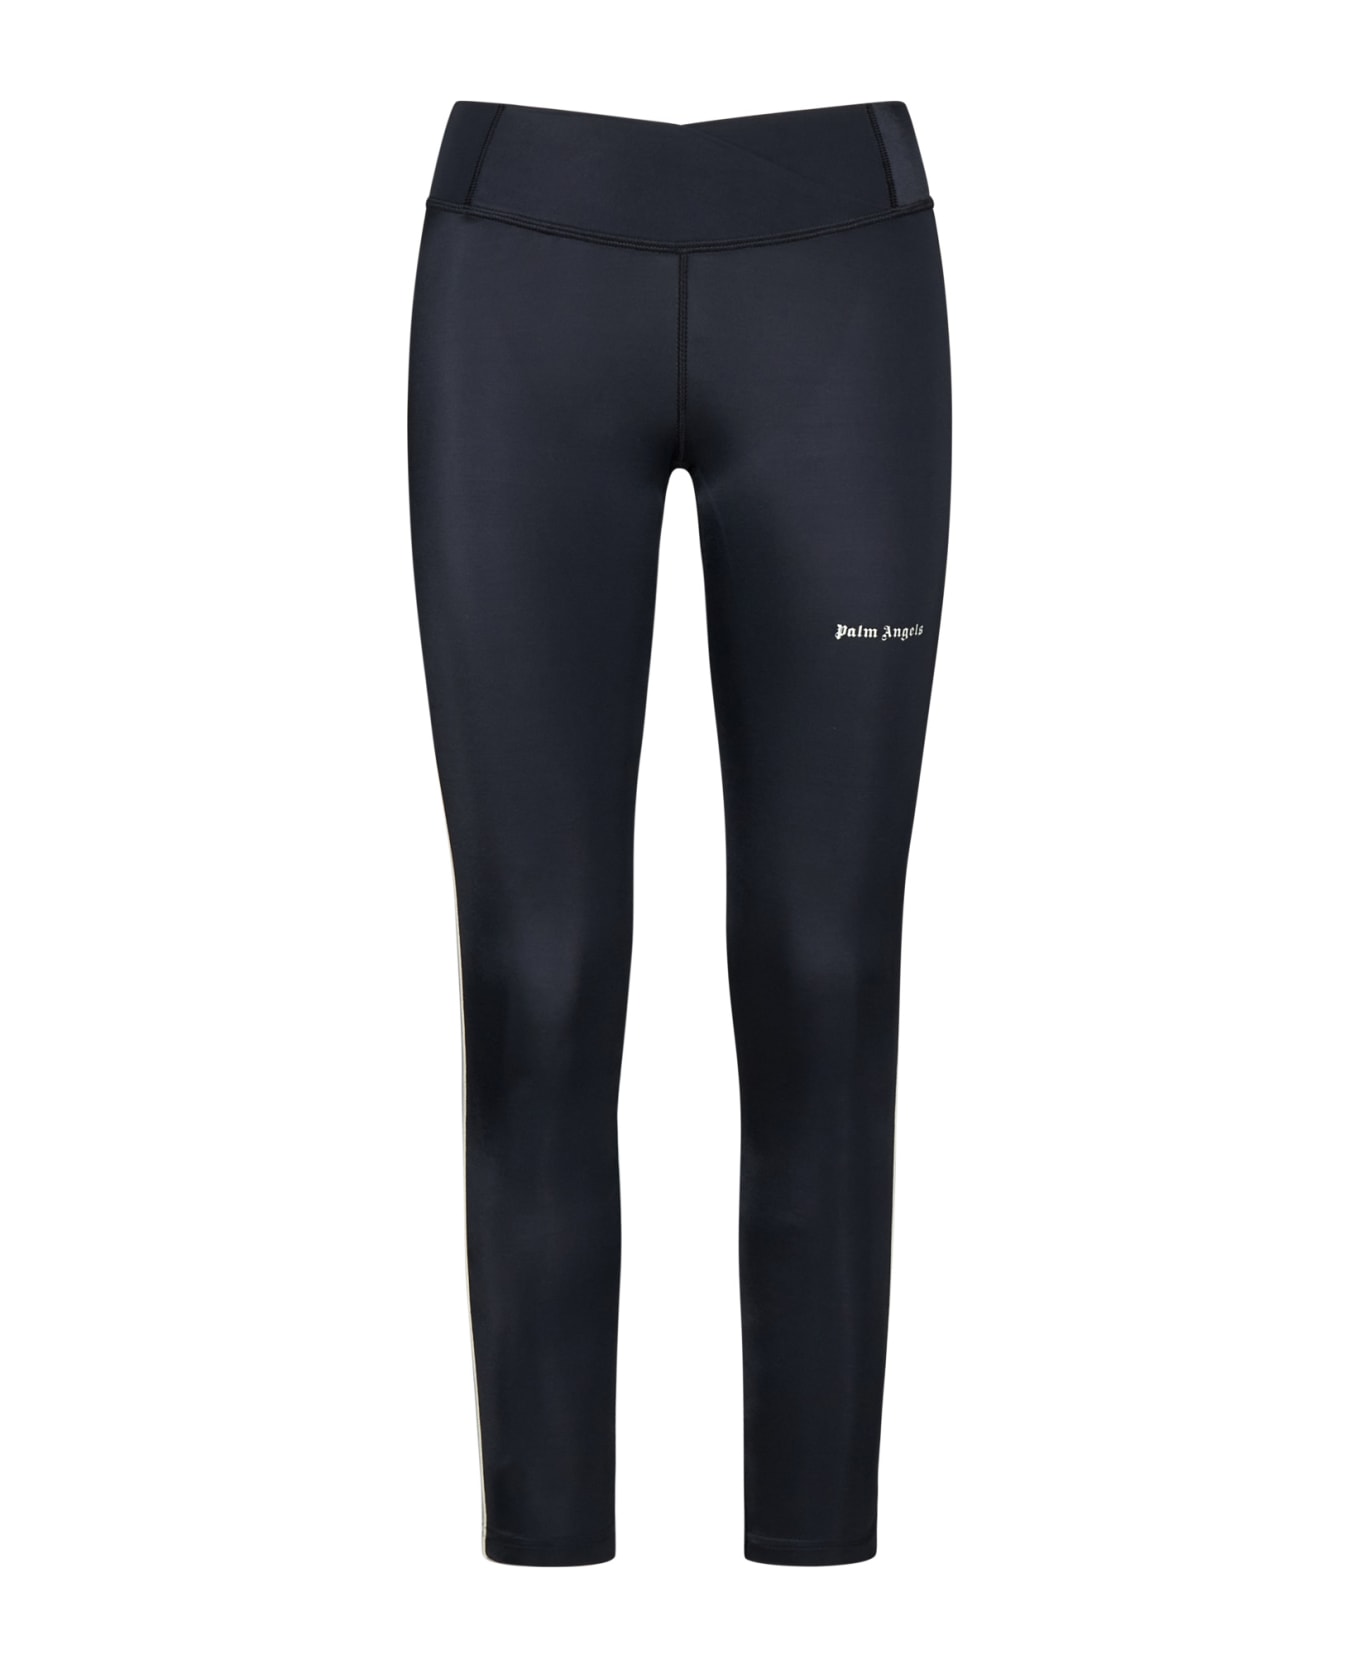 Palm Angels Leggings With Contrasting Side Bands - Black